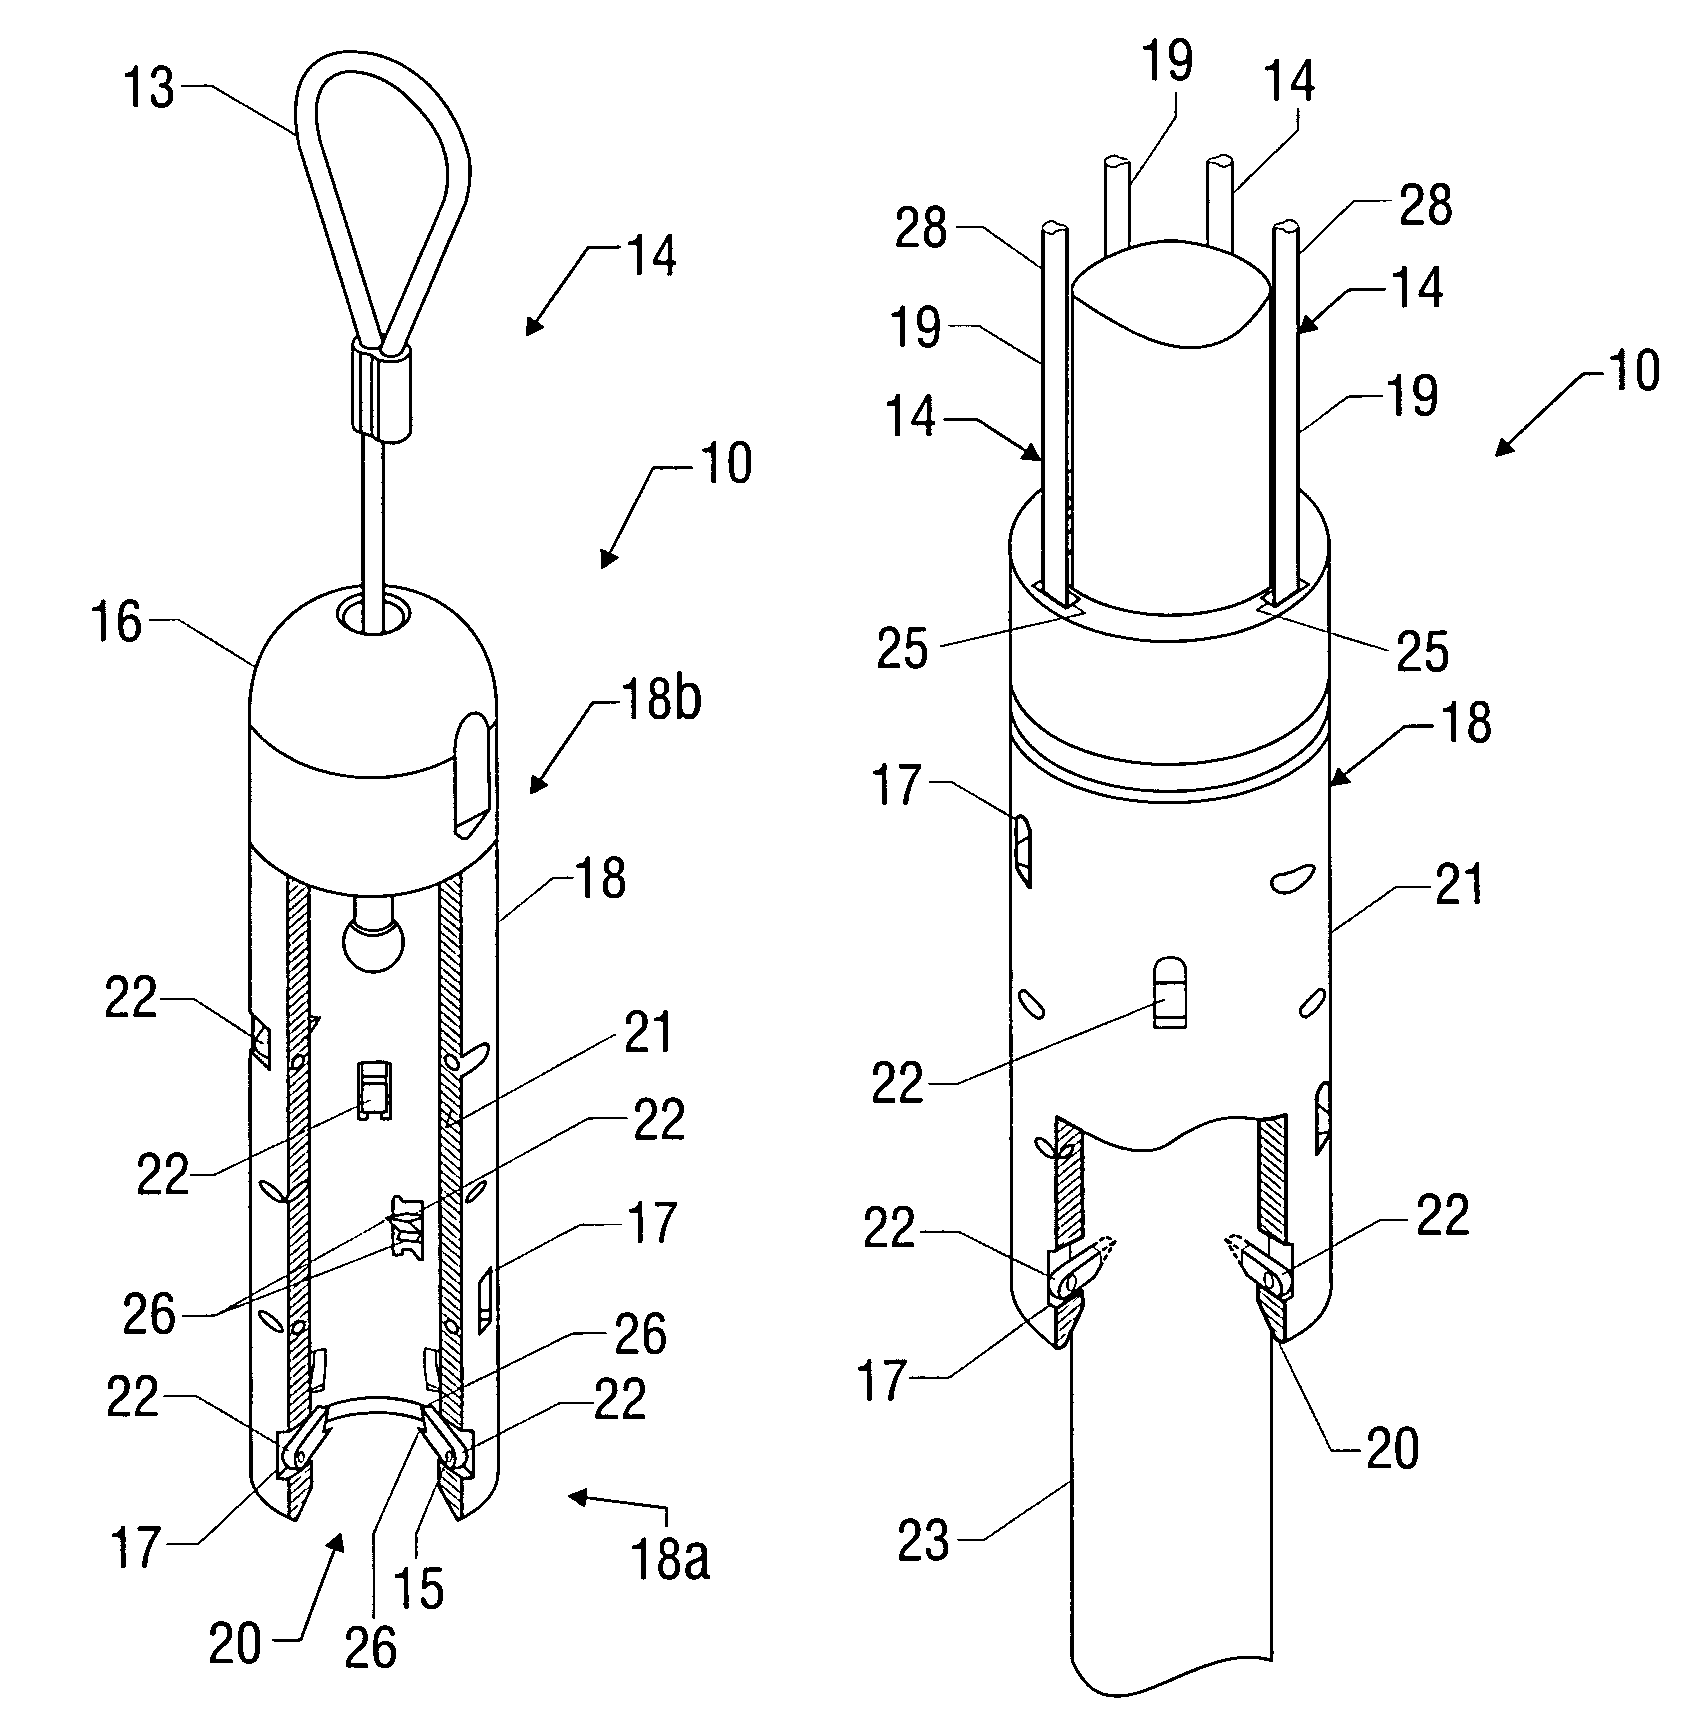 Apparatus and methods for gripping an elongated item